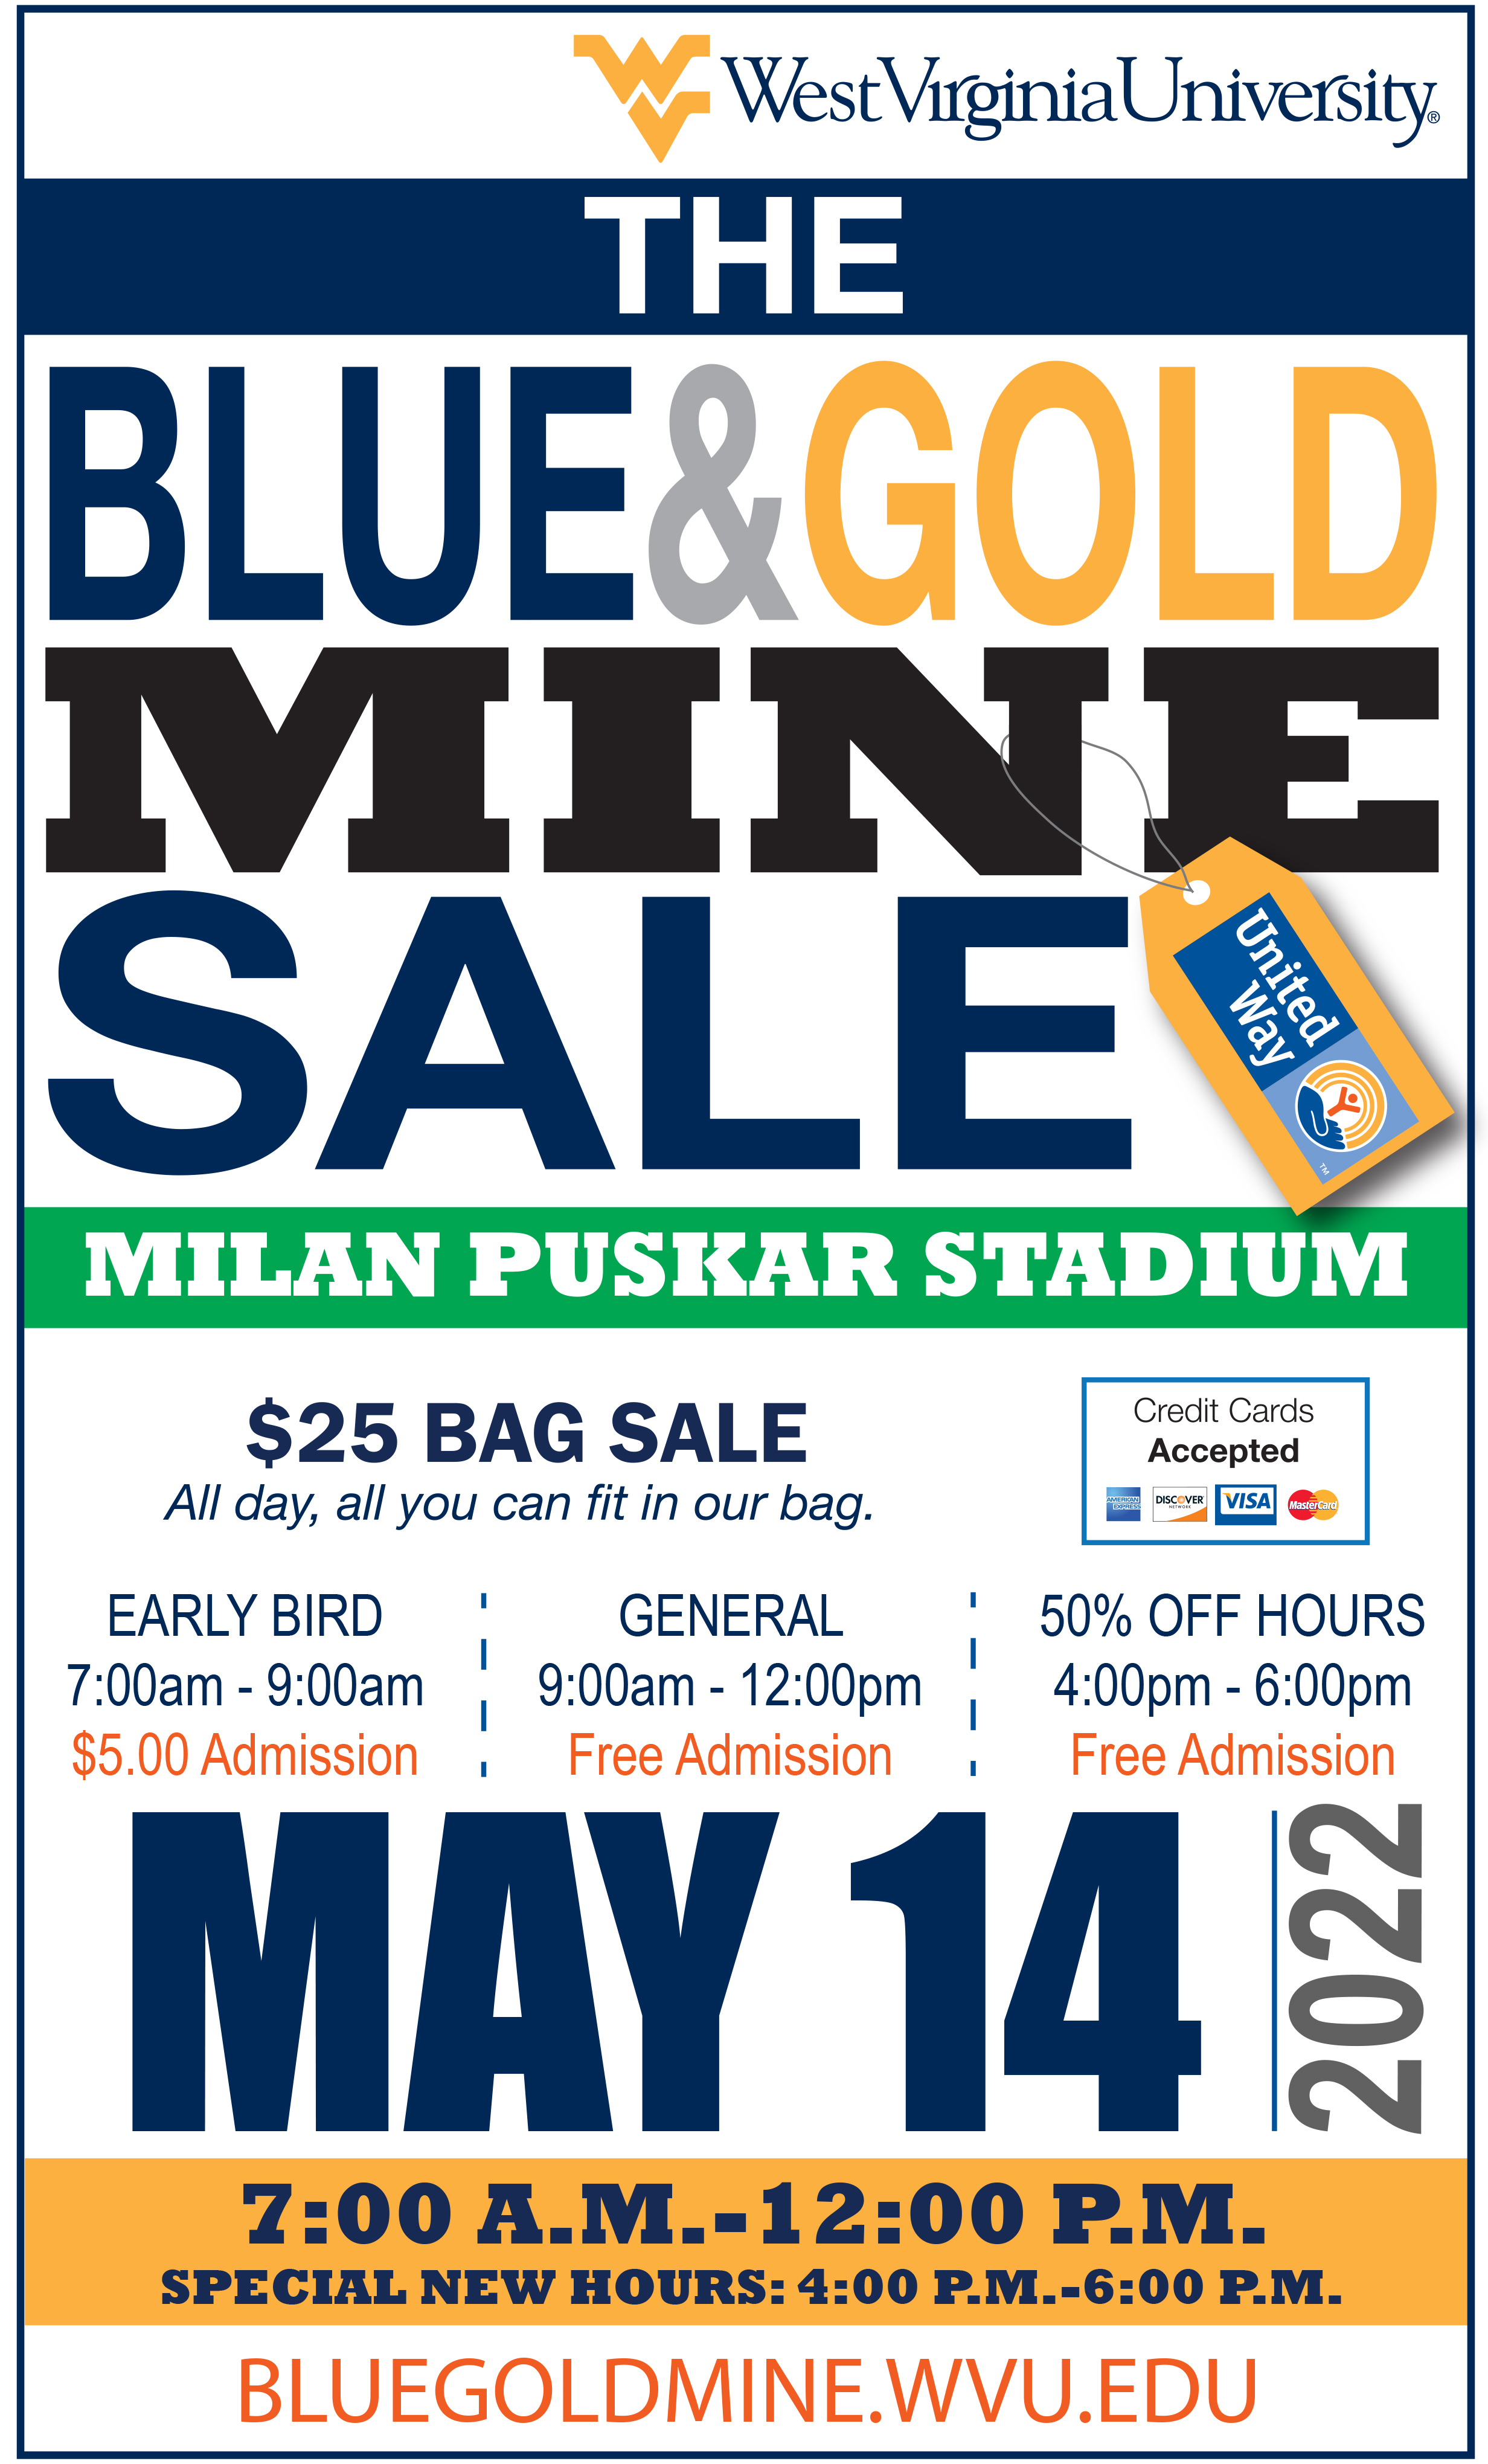 The Blue and Gold Mine Sale will return May 14, 2022.